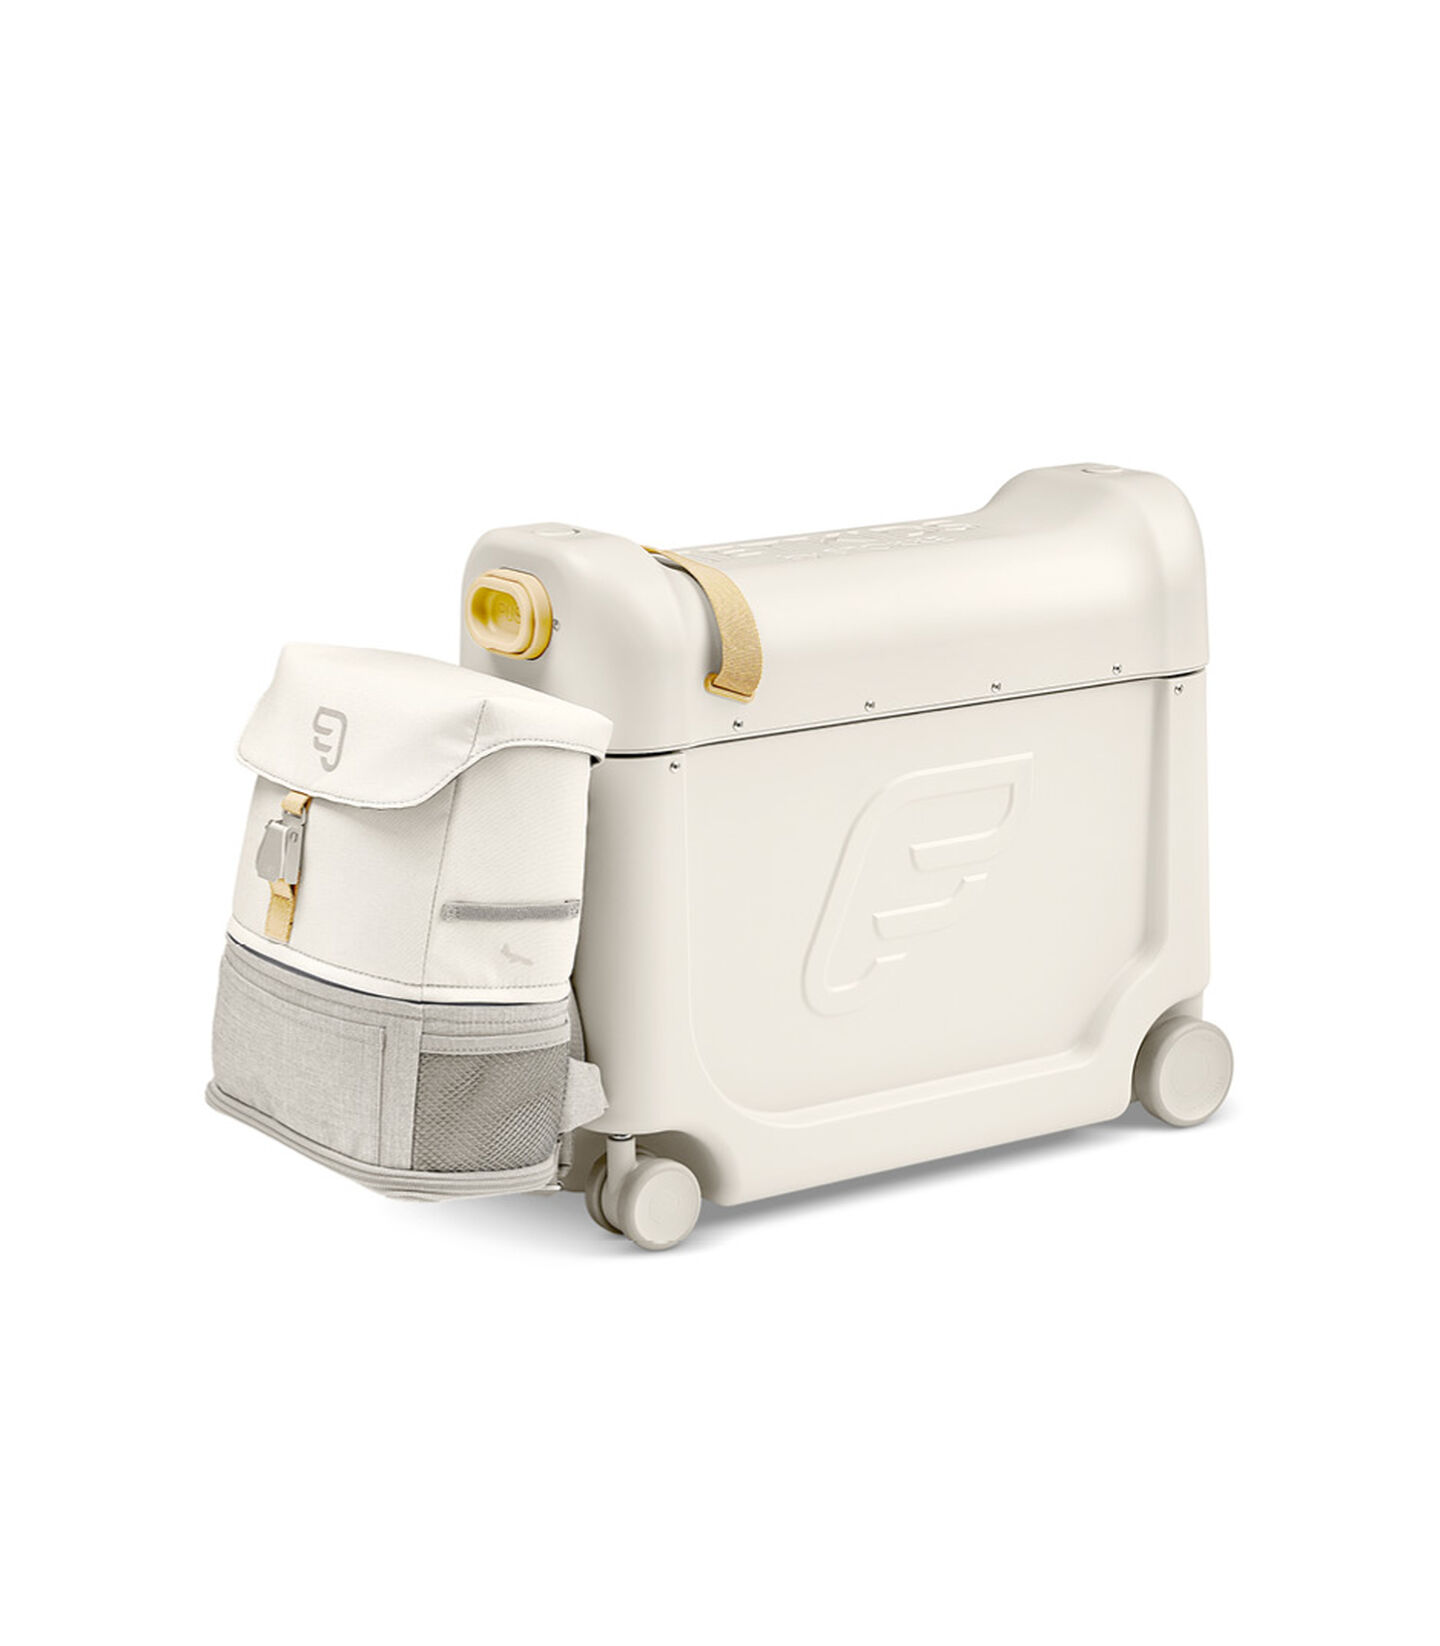 JetKids™ by Stokke® Crew BackPack on BedBox V3, Full Moon White. Bundle. view 10